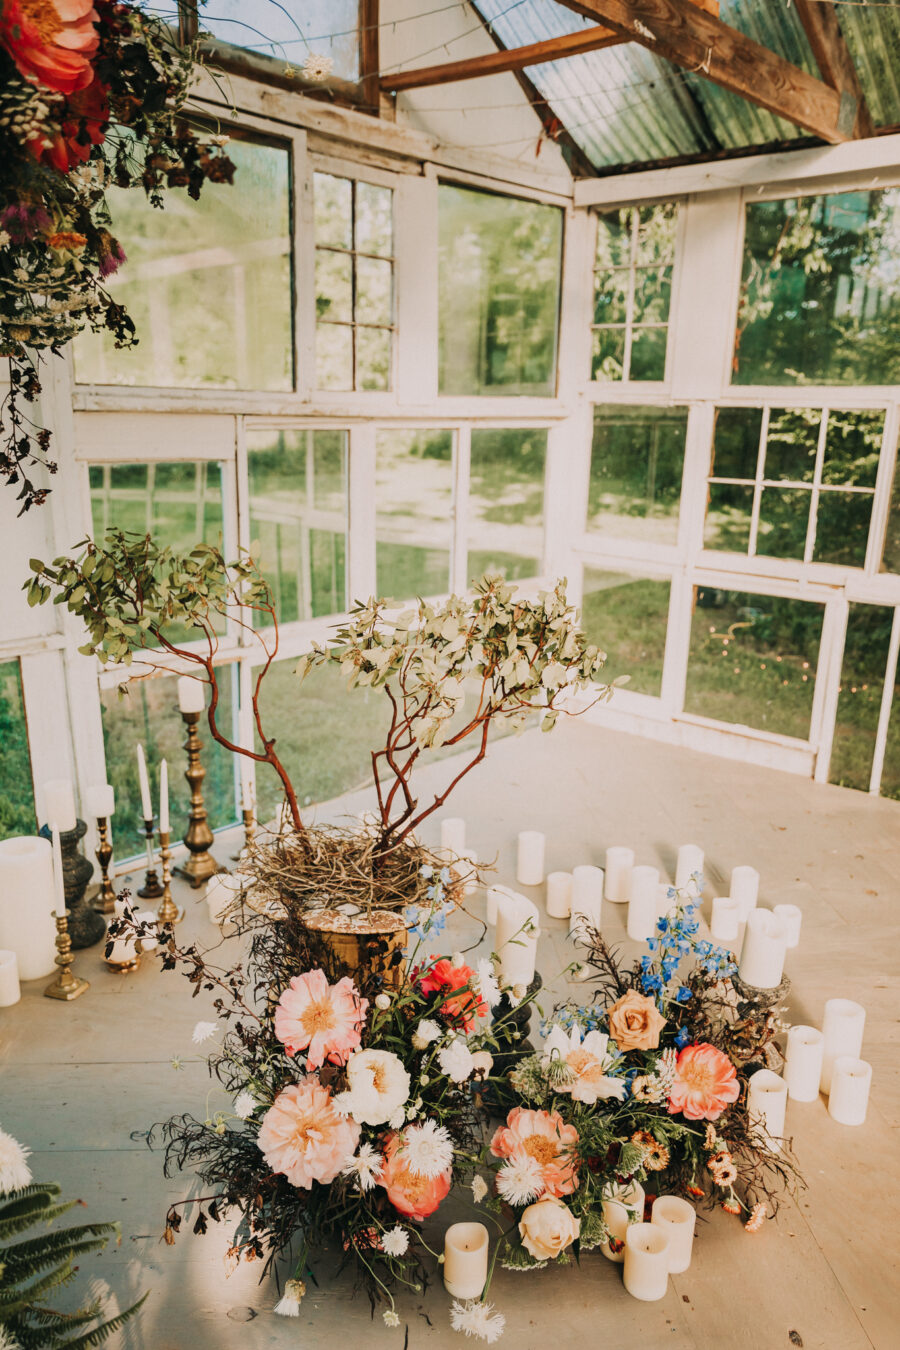 Floral wedding ceremony decor: Flower Farm Styled Shoot by Billie-Shaye Style featured on Nashville Bride Guide